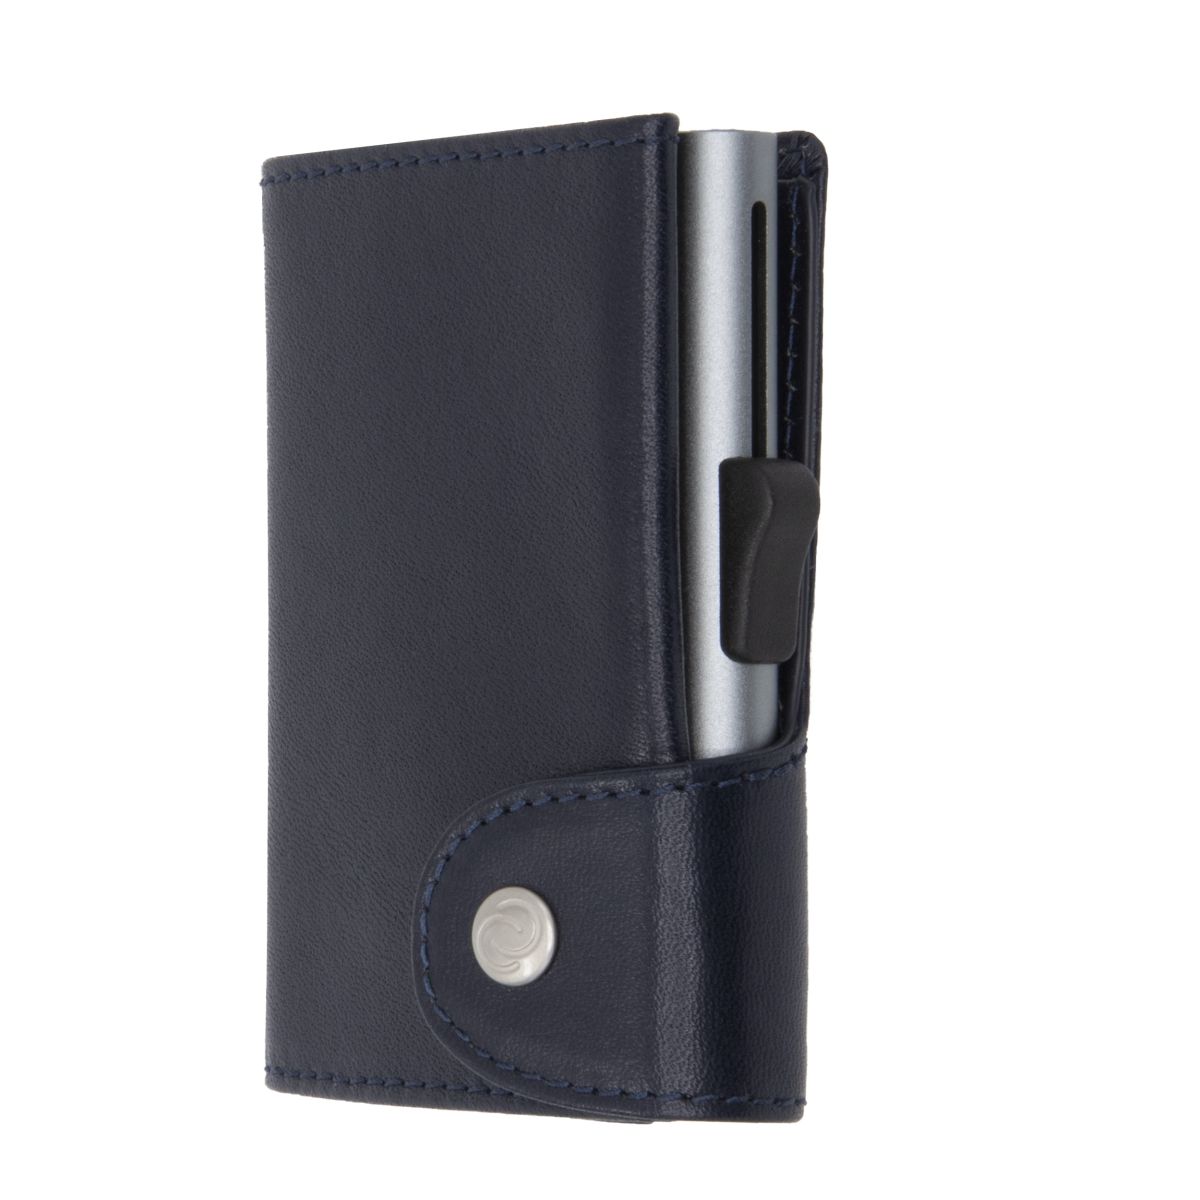 C-Secure XL Aluminum Wallet with Genuine Leather and Coins Pocket - Blue Montana